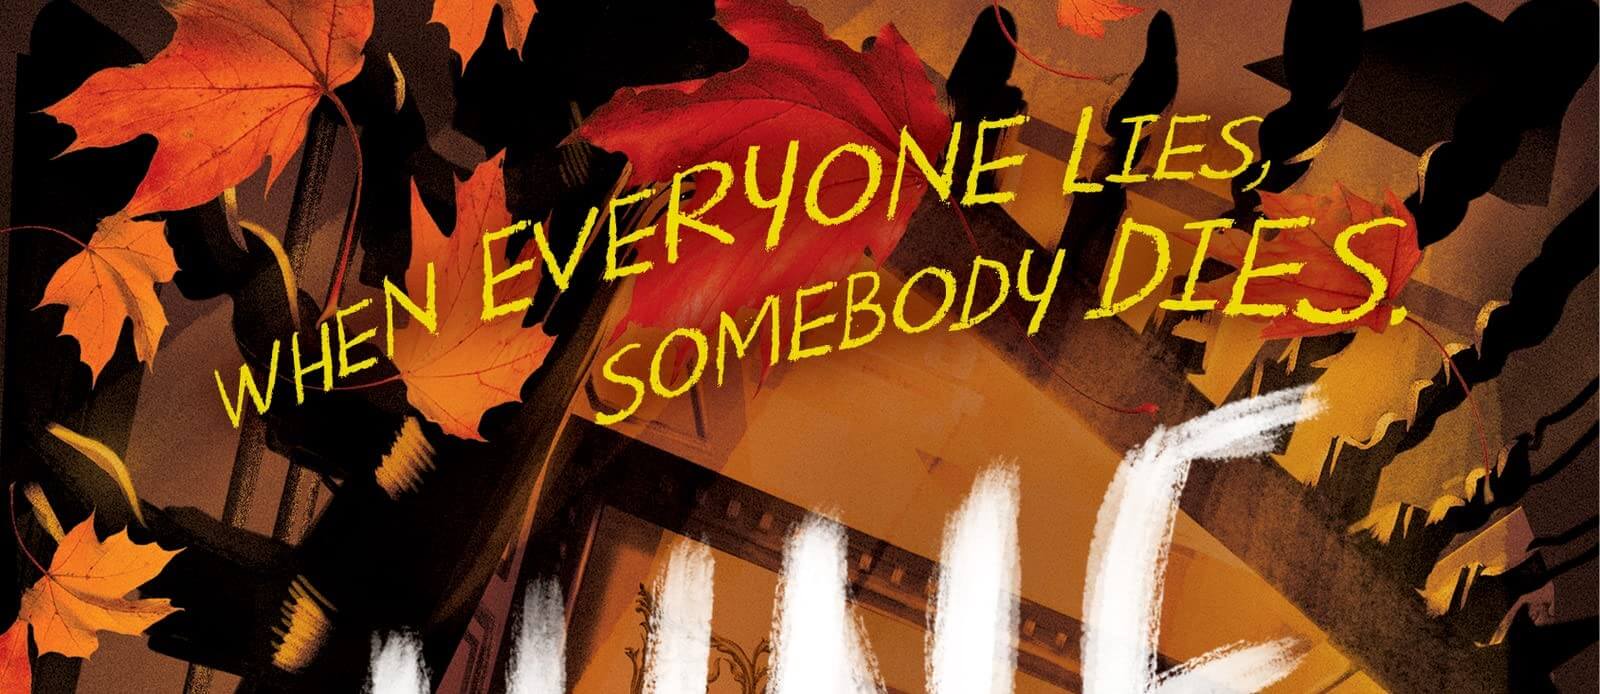 The words "When everyone lies, somebody dies" scrawled over autumn leaves